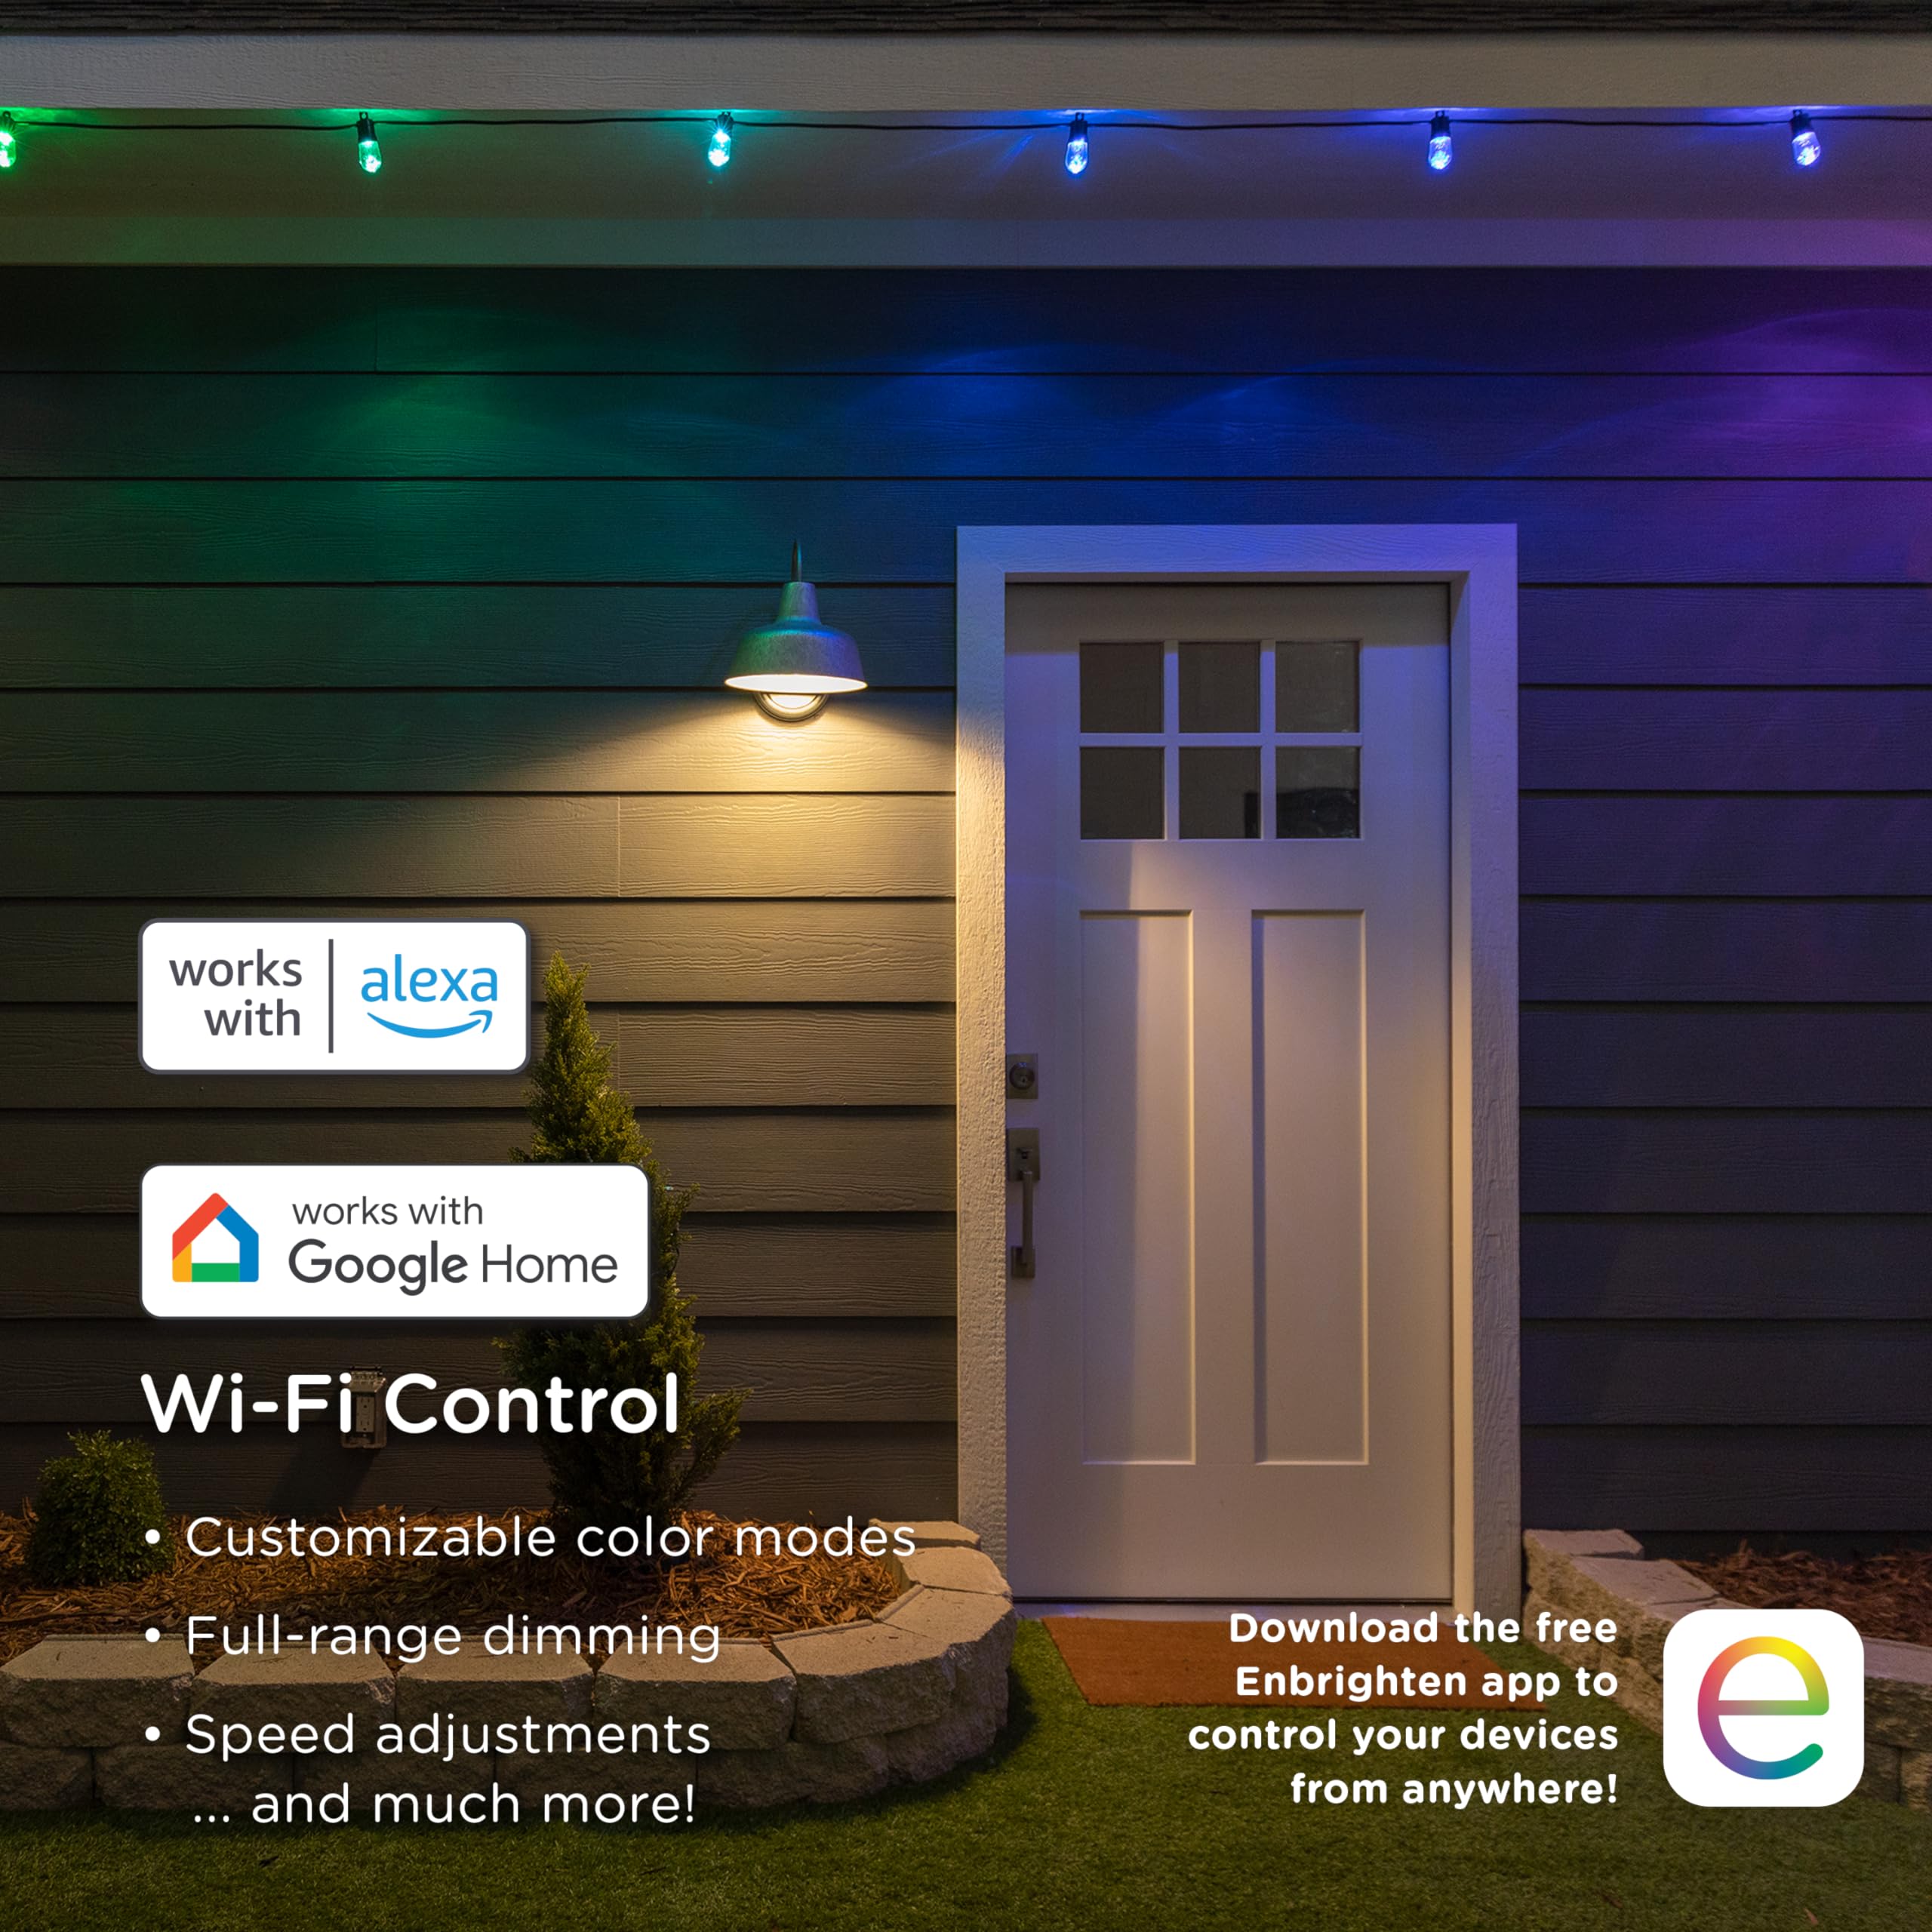 Enbrighten LED Premium Smart Color Changing String Lights, 24ft Black Cord, 12 Shatterproof Acrylic Bulbs, Weatherproof, Customizable, Wi-Fi App Control, Dimmable Outdoor String Lights, 2 Pack, 82764